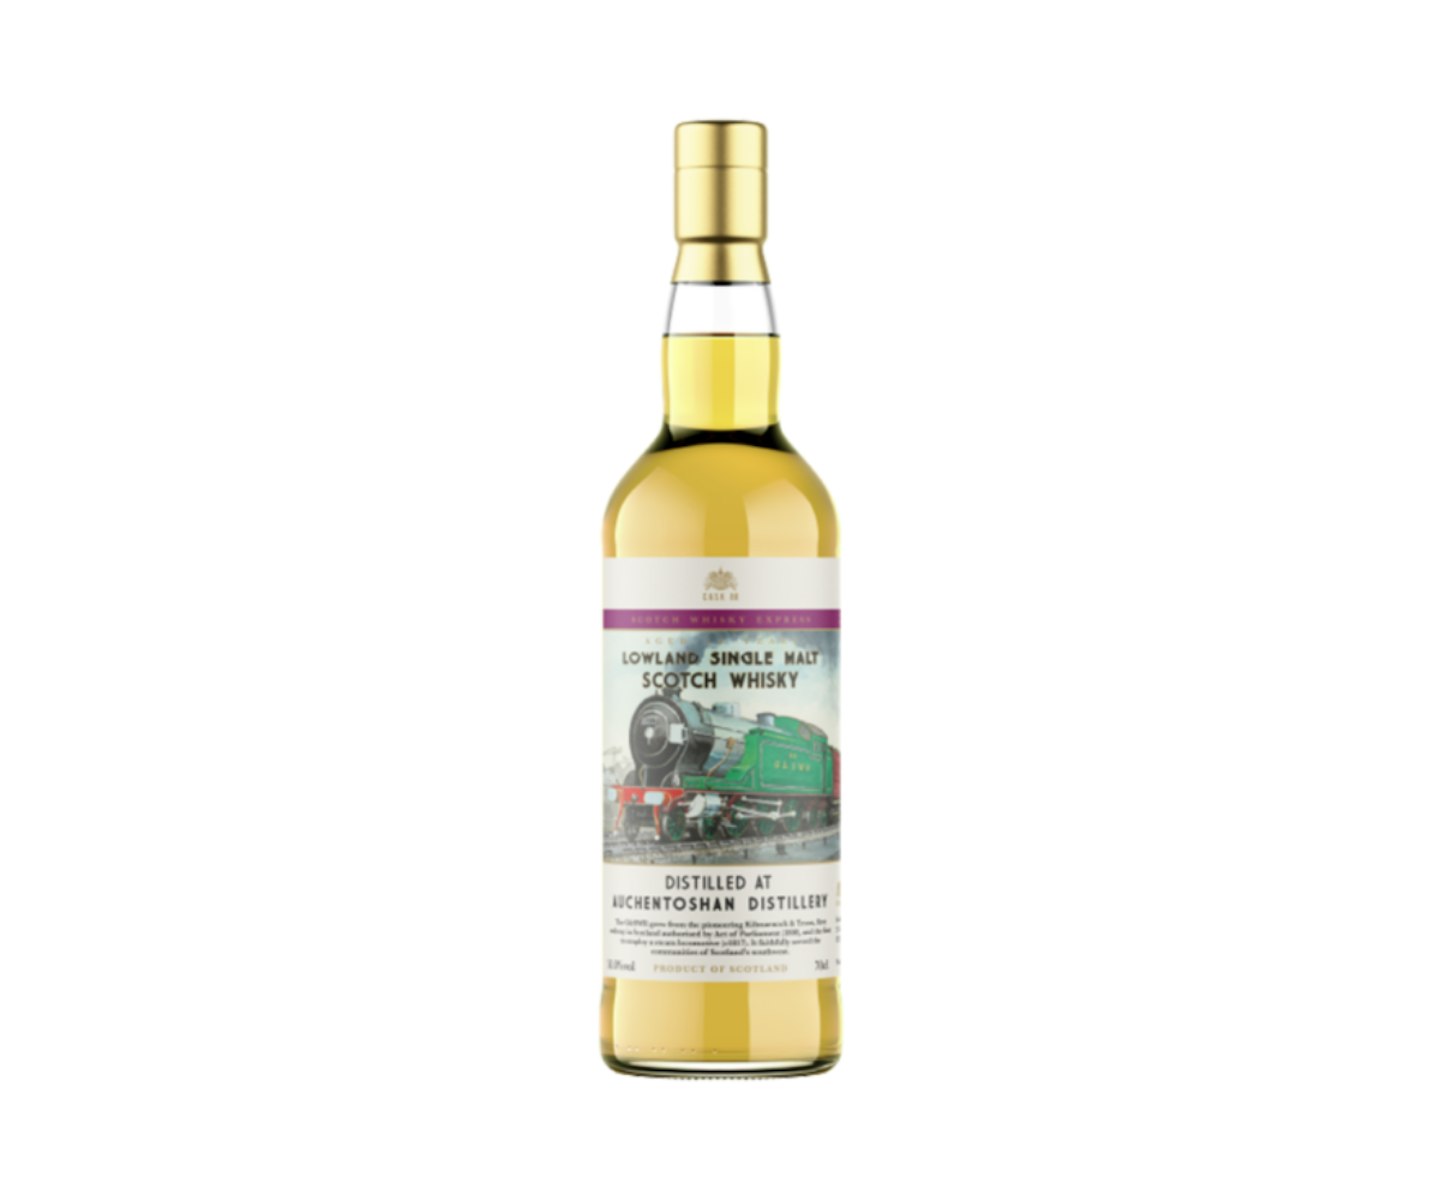 Cask88 The Scotch Whisky Express Series 3rd Release